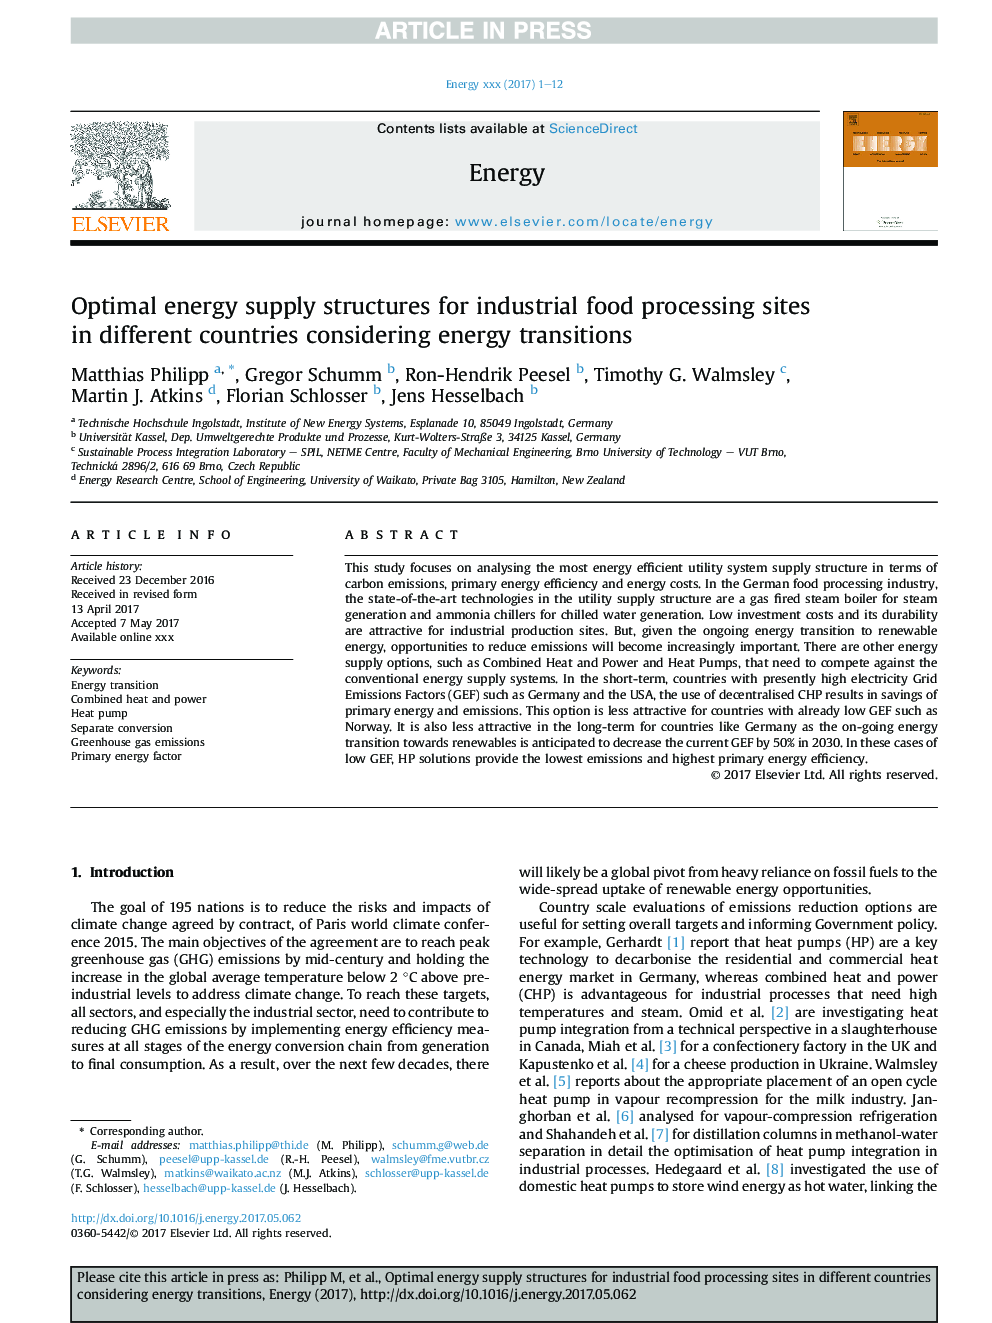 Optimal energy supply structures for industrial food processing sites in different countries considering energy transitions